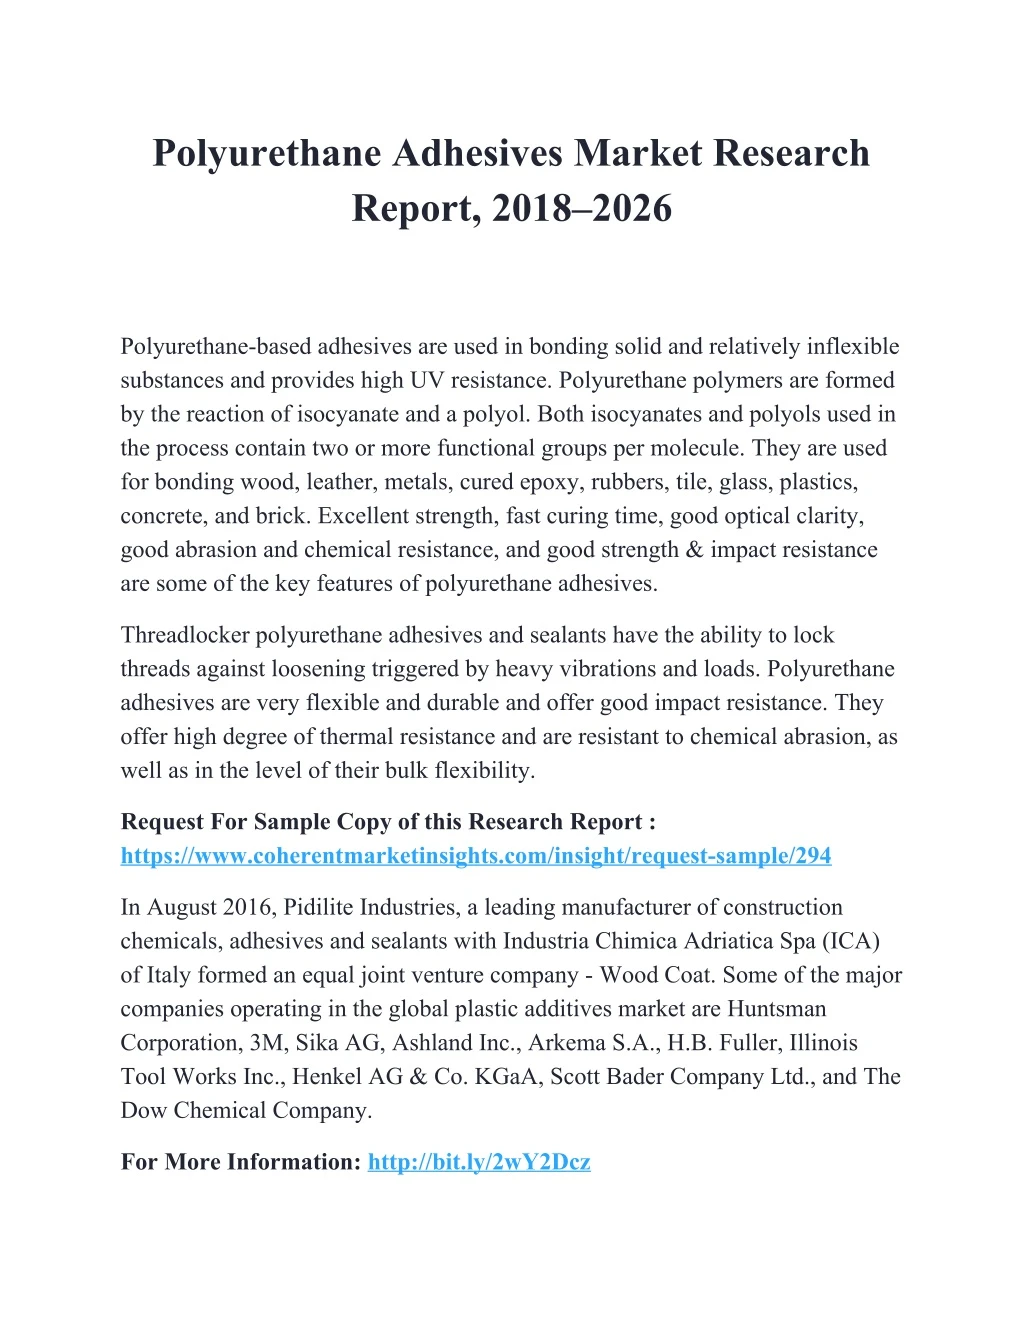 polyurethane adhesives market research report